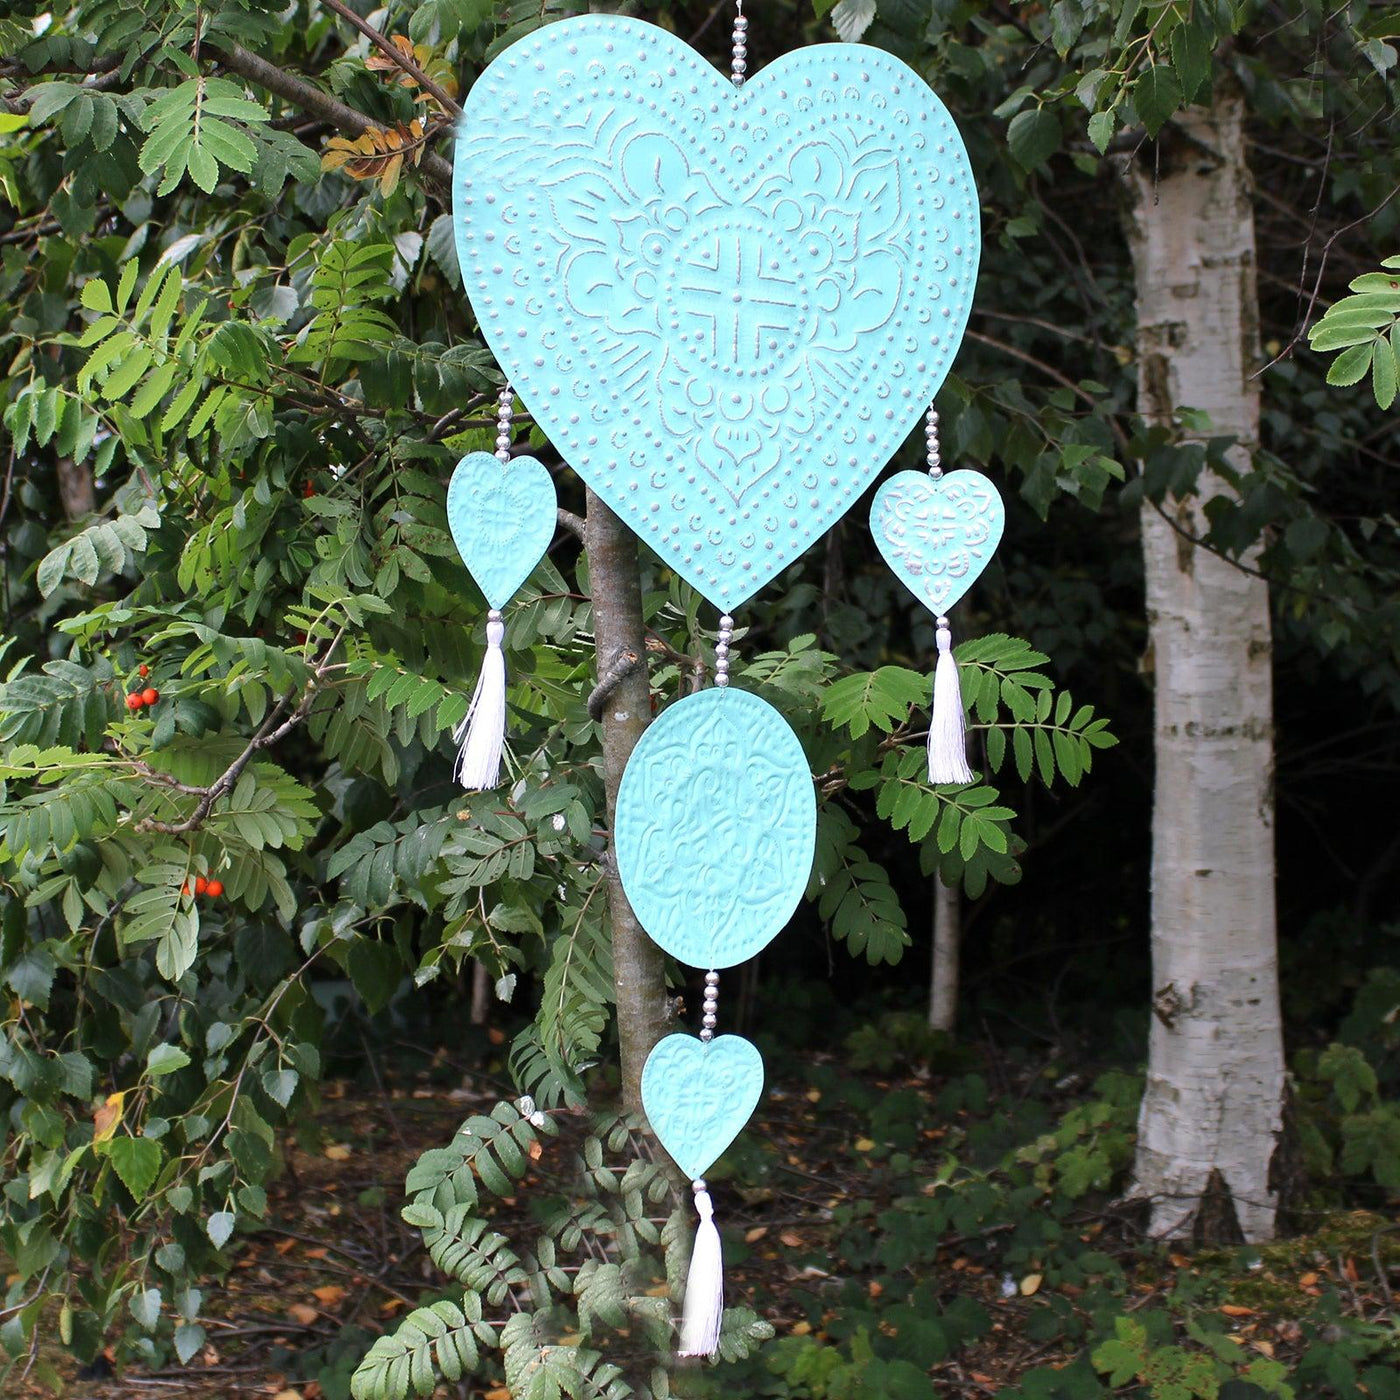 Large Bali Style Aluminium Heart Wall Decor With Tassels In Pink, Mint And White.